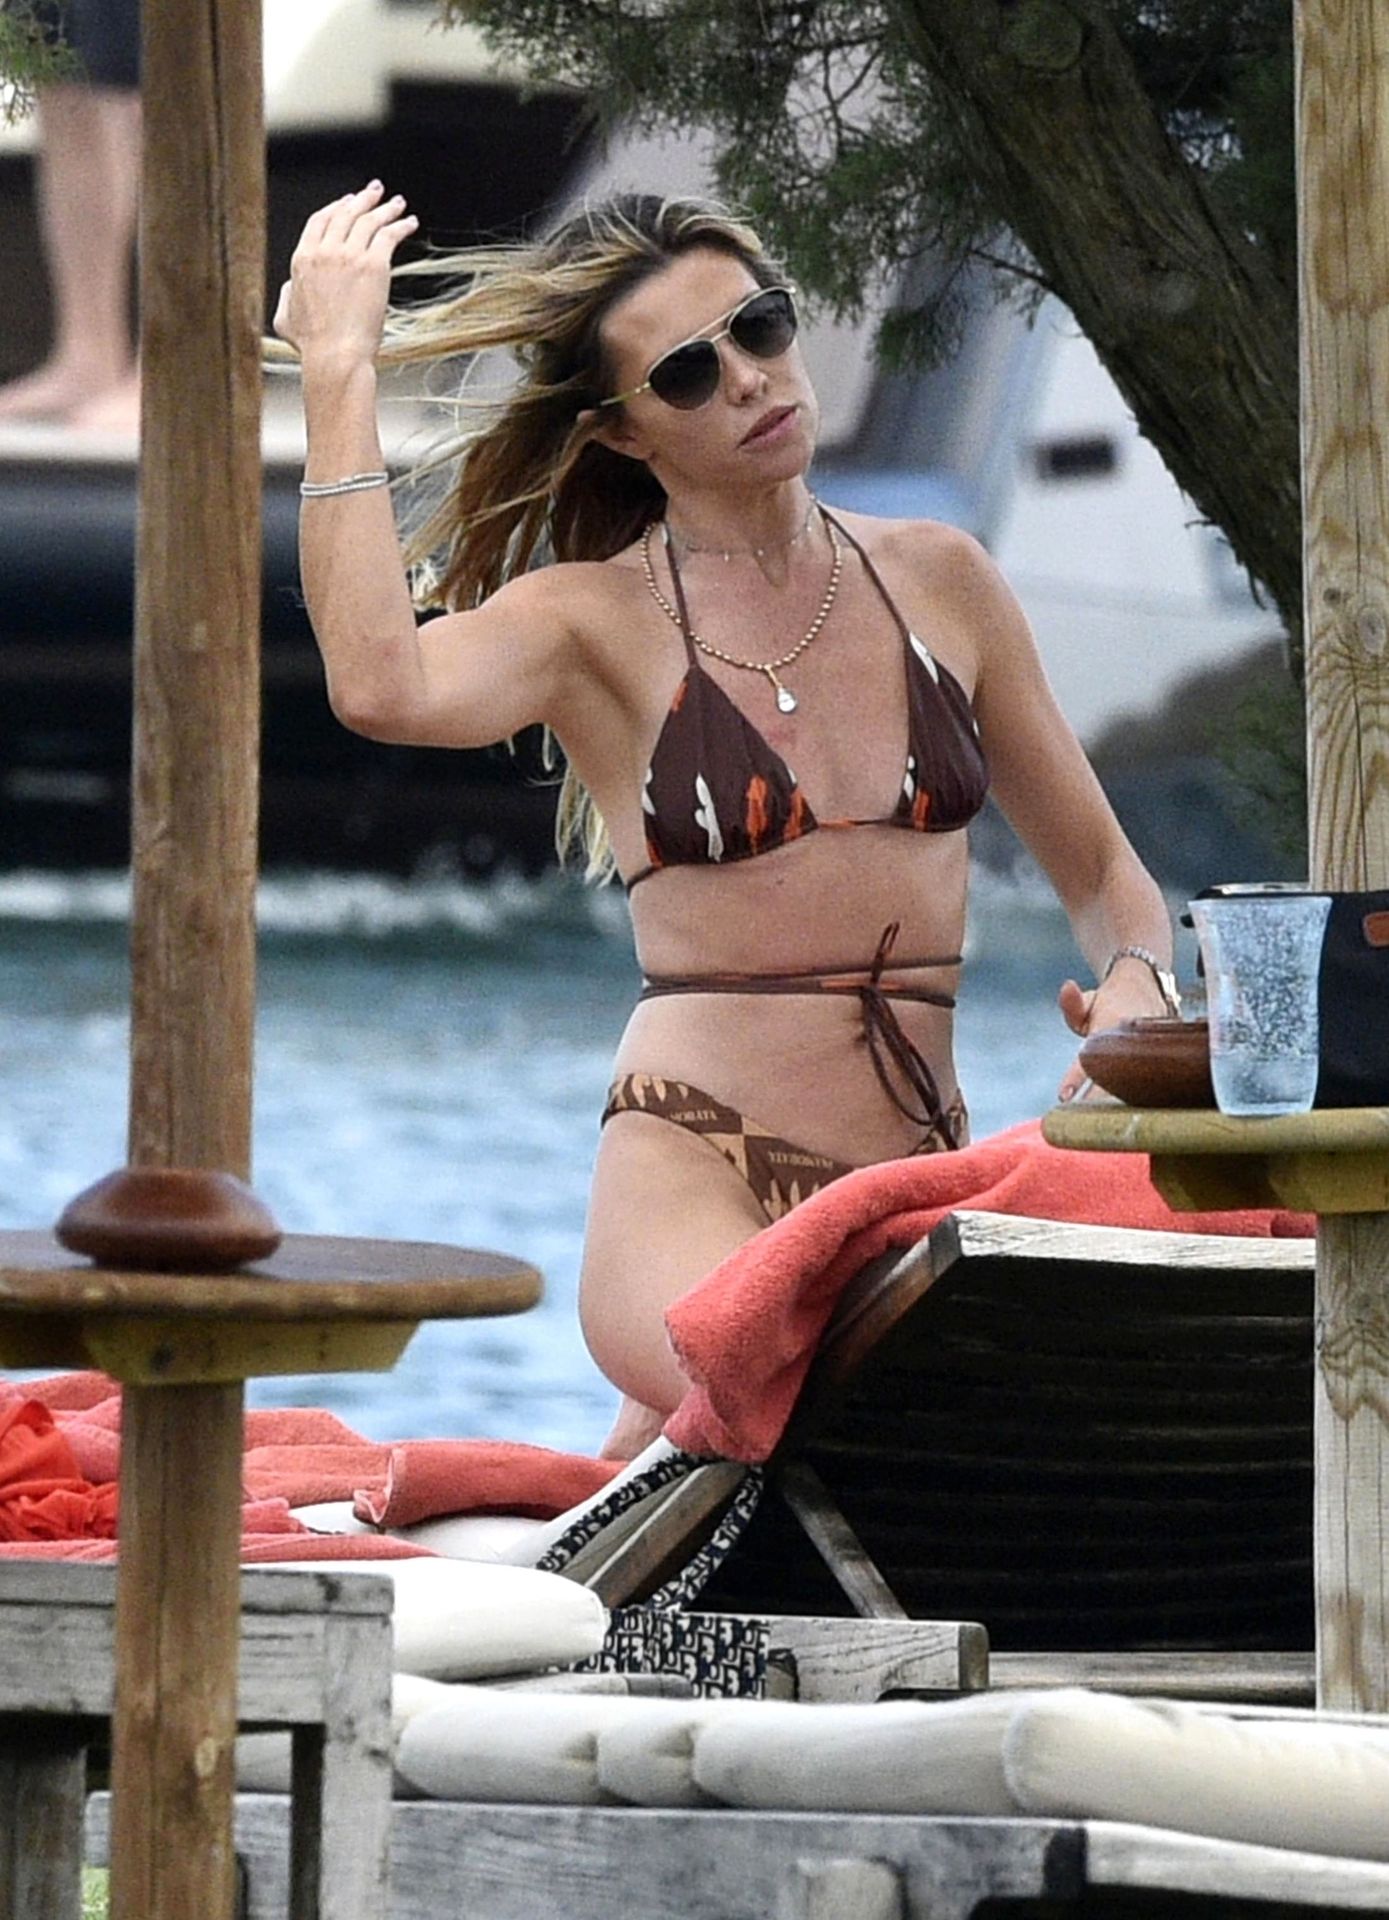 Peter Crouch & Abbey Clancy Tan It Up on Their Sunshine Break in Porto Cervo (58 Photos)